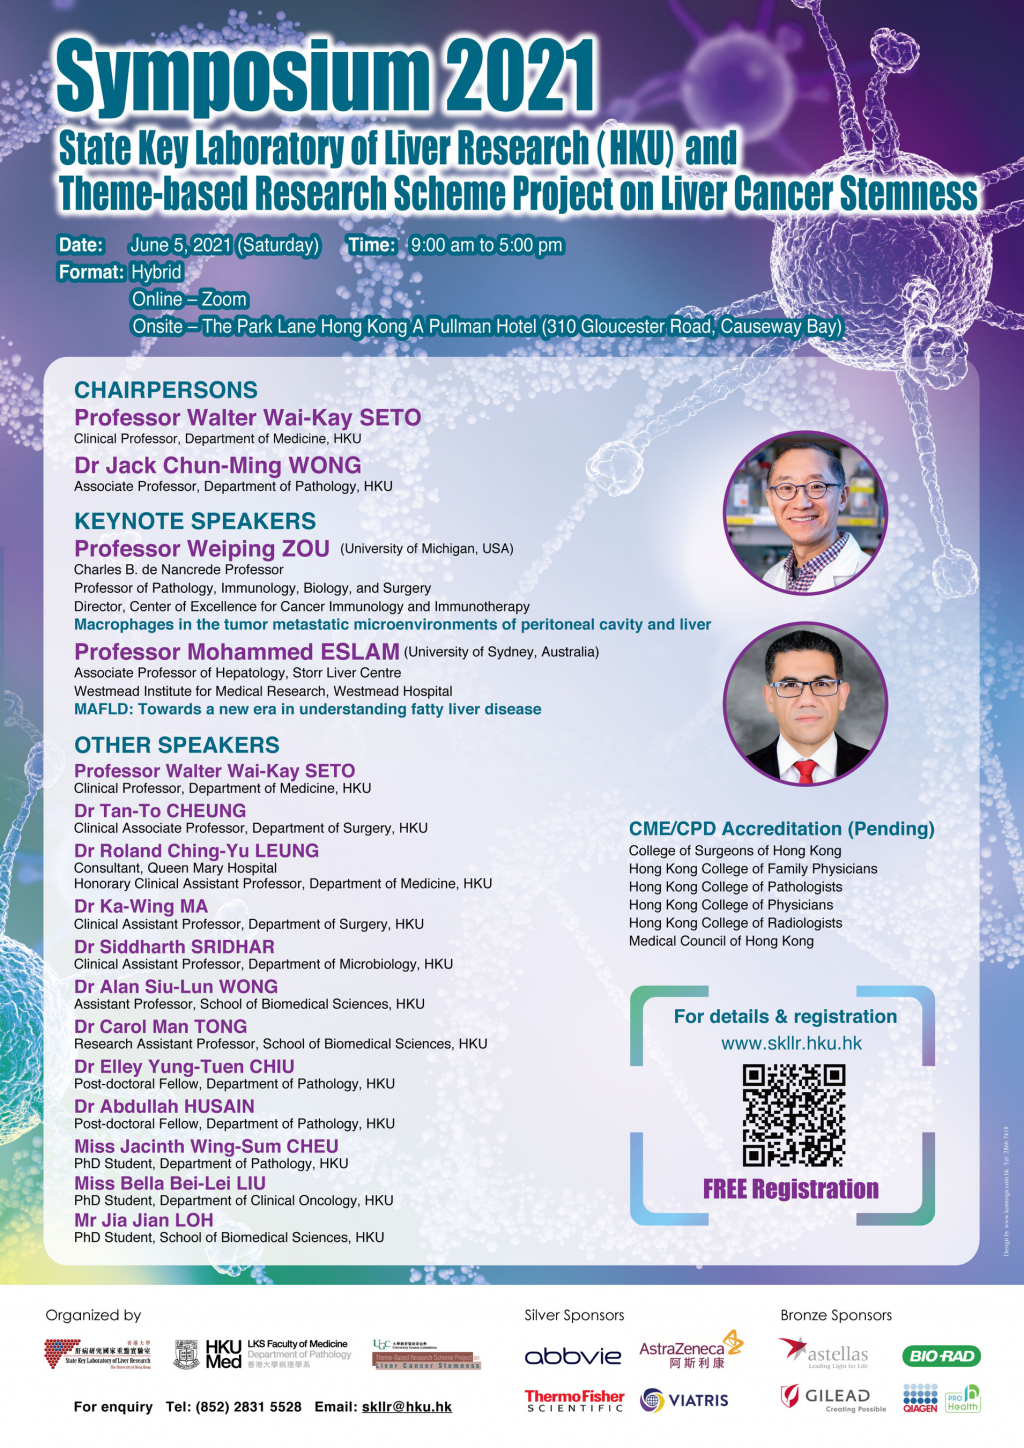 Symposium 2021 of State Key Laboratory of Liver Research (HKU) and Theme-based Research Scheme Project on Liver Cancer Stemness (5 Jun 2021)